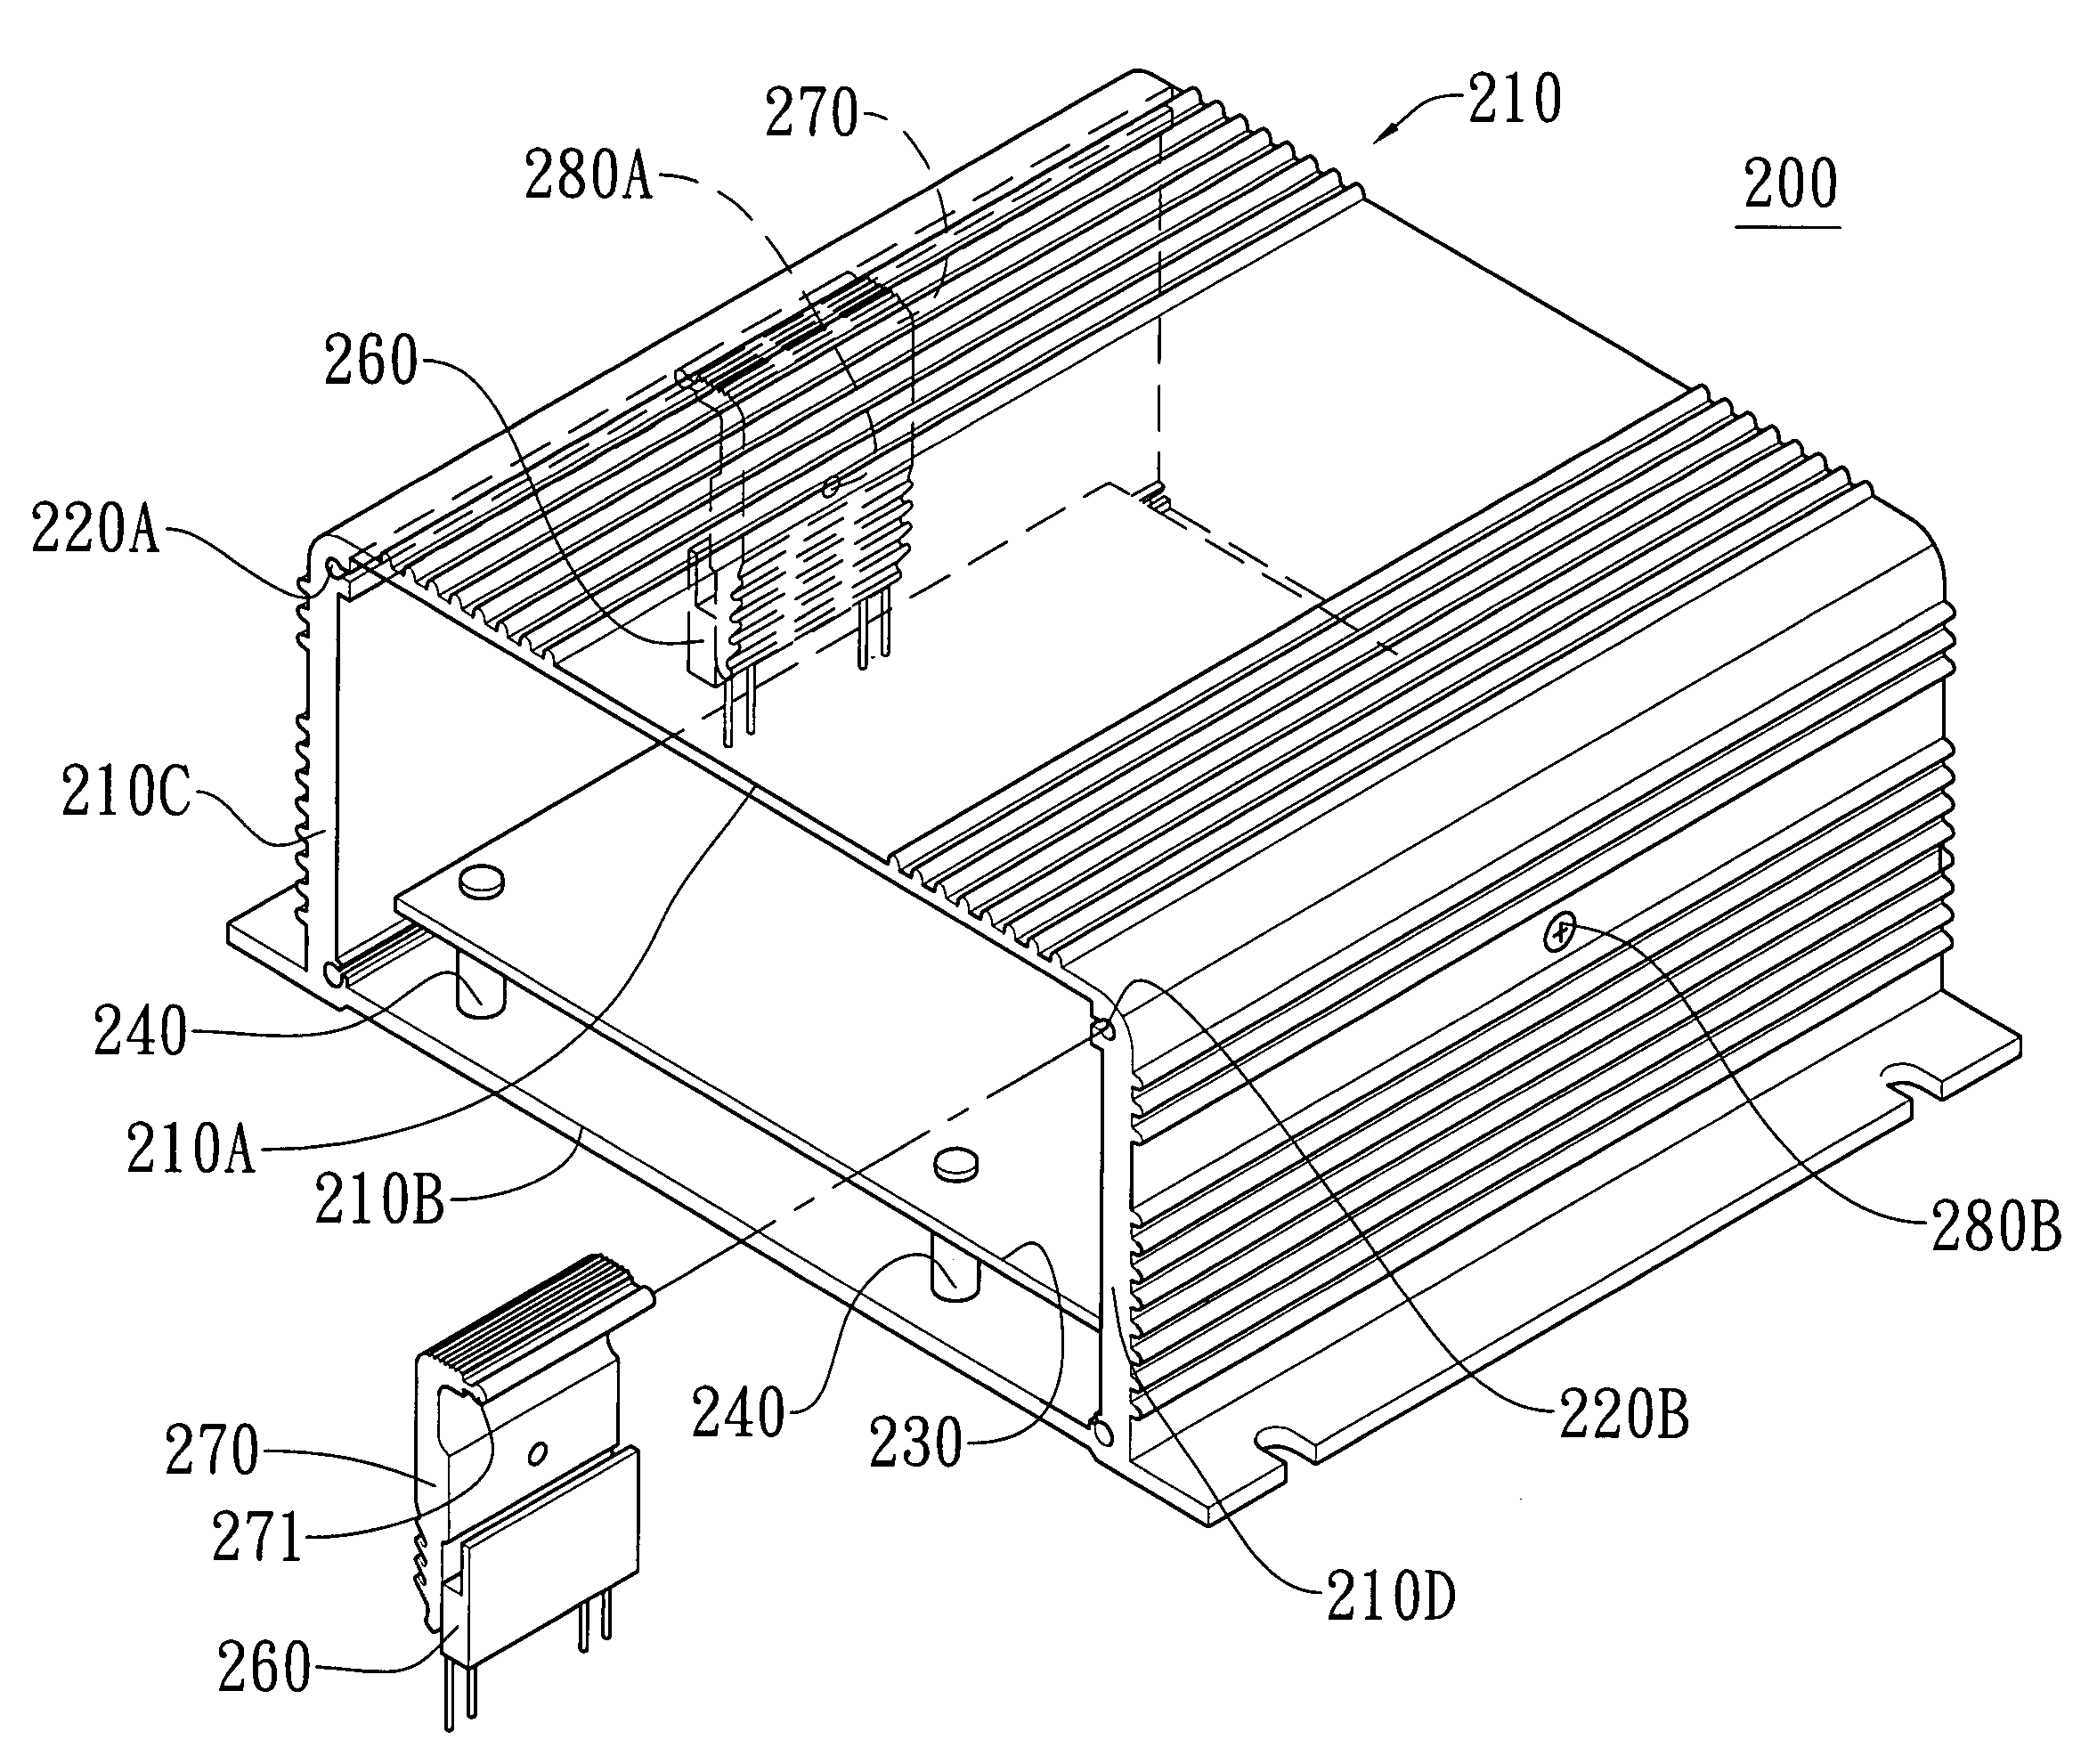 Combination of inverter casing and heat sink member